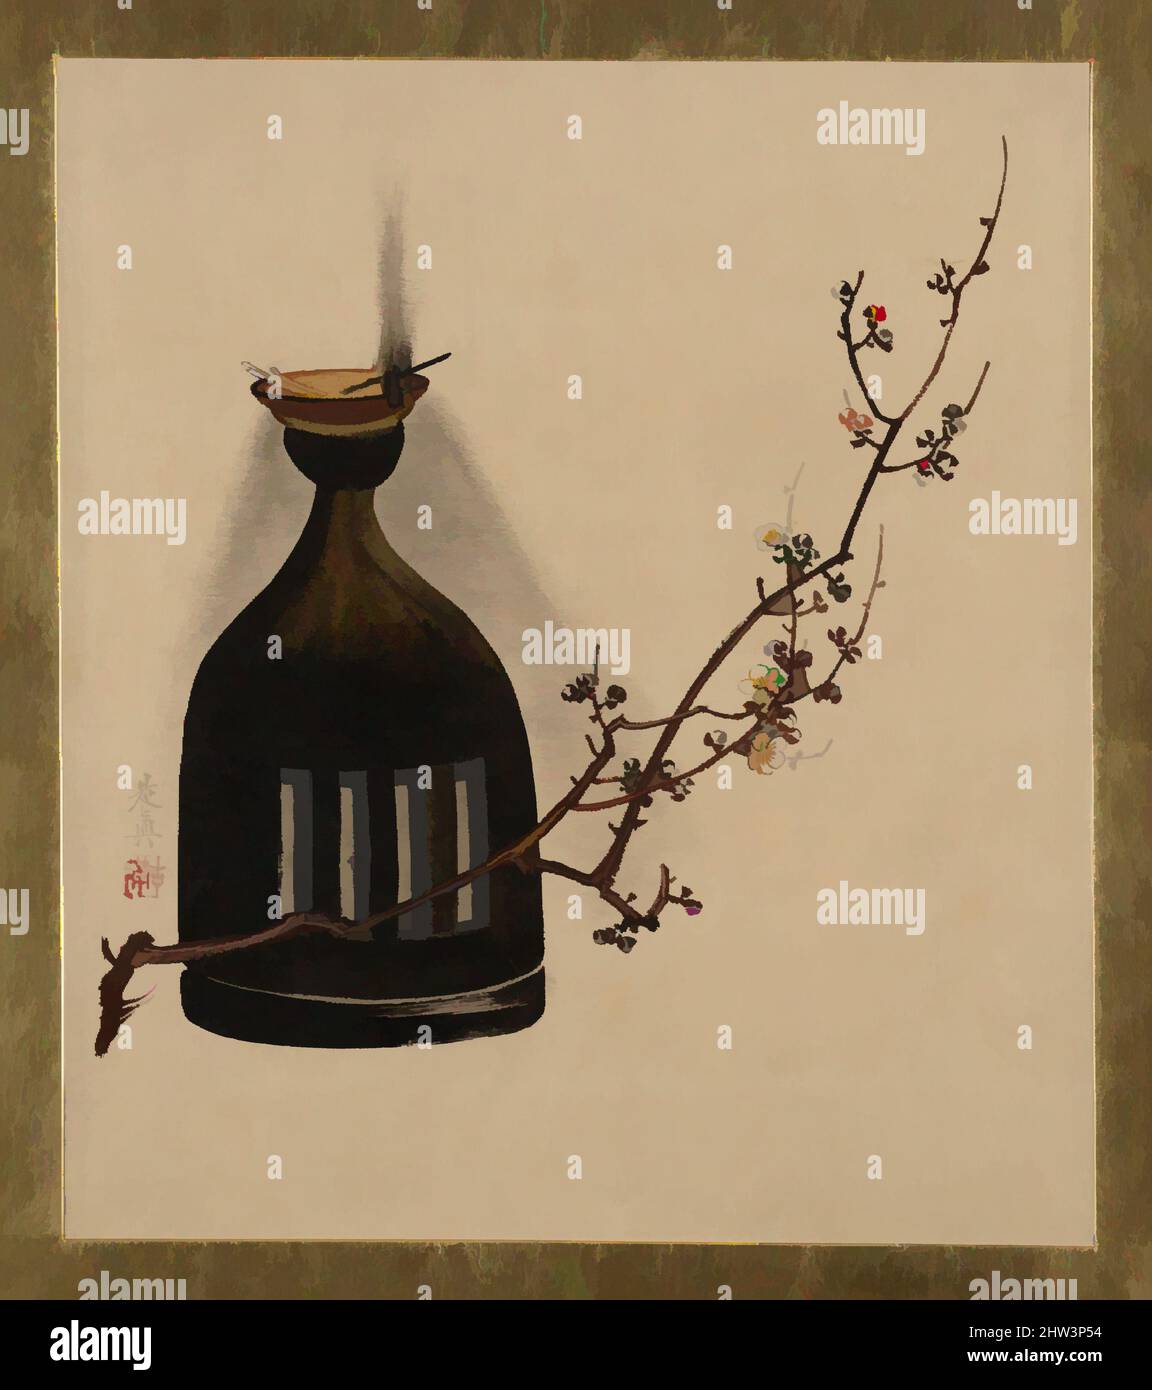 Art inspired by Lacquer Paintings of Various Subjects: Plum Branch with Oil Lamp, Meiji period (1868–1912), 1882, Japan, Lacquer on paper, 7 1/2 x 6 1/2 in. (19.1 x 16.5 cm), Ceramics, Shibata Zeshin (Japanese, 1807–1891), Well known in the West as a painter and a lacquer artist, Classic works modernized by Artotop with a splash of modernity. Shapes, color and value, eye-catching visual impact on art. Emotions through freedom of artworks in a contemporary way. A timeless message pursuing a wildly creative new direction. Artists turning to the digital medium and creating the Artotop NFT Stock Photo